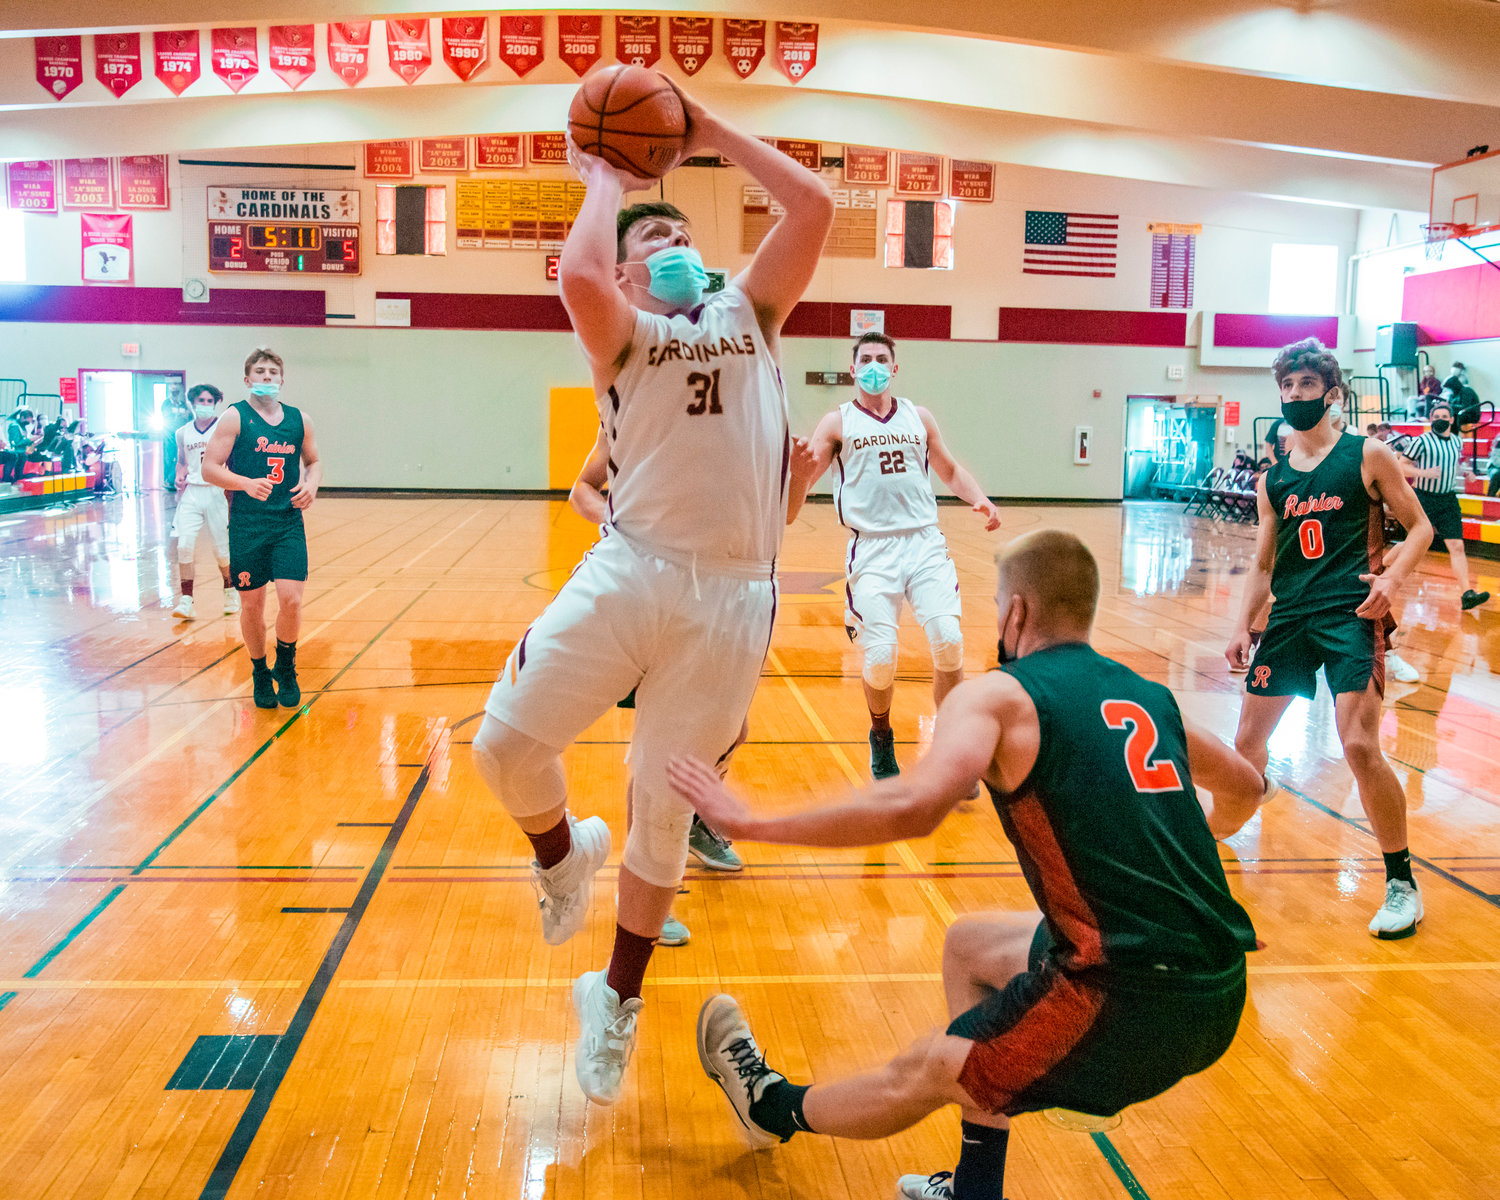 Winlock’s Nolan Swofford (31) goes up with the ball during a game against Rainier on Wednesday.